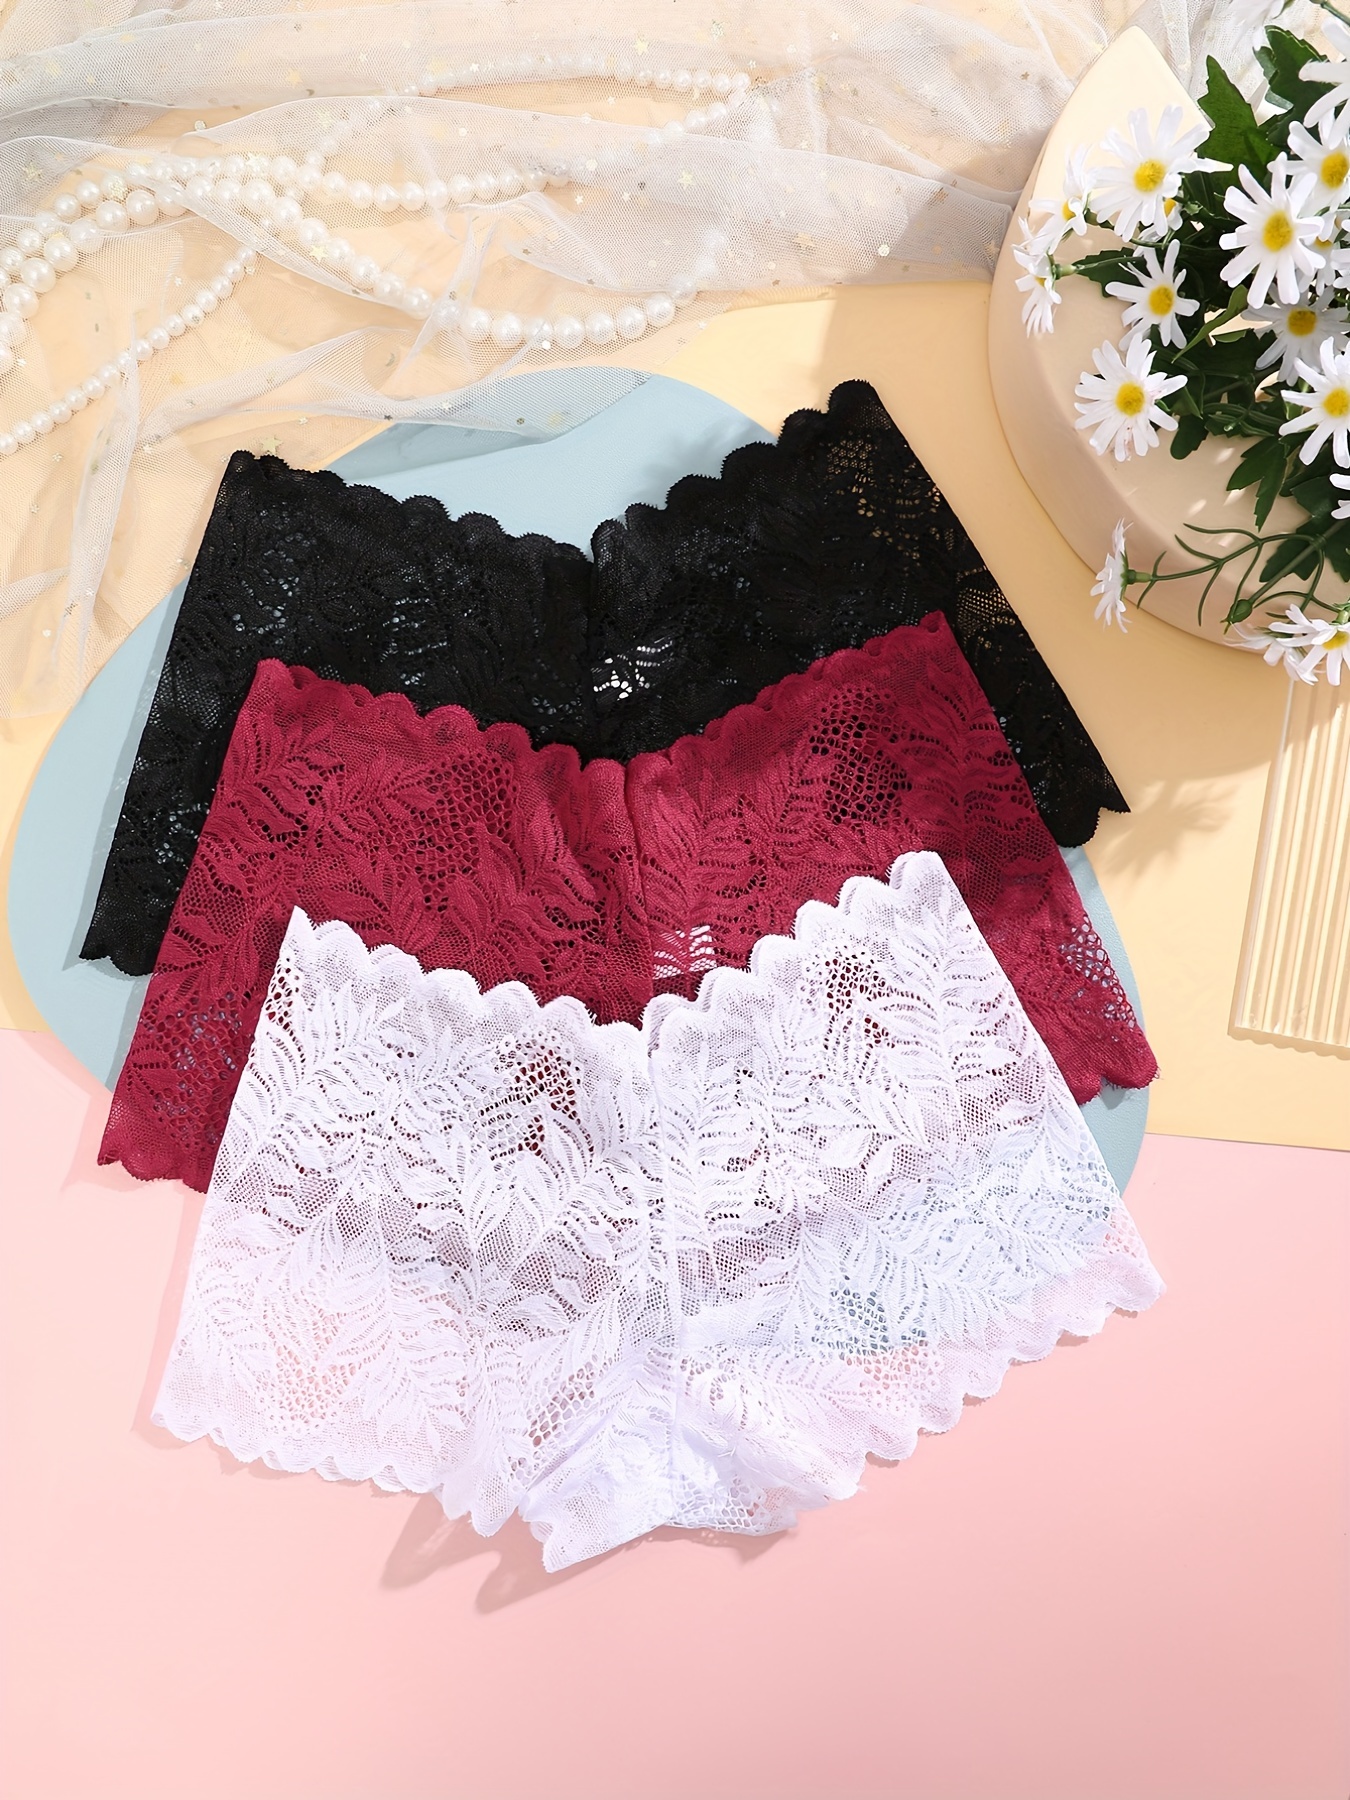 Buy EVERYDAY MAUVE AND BLACK LACE BOY SHORTS SET OF 2 for Women